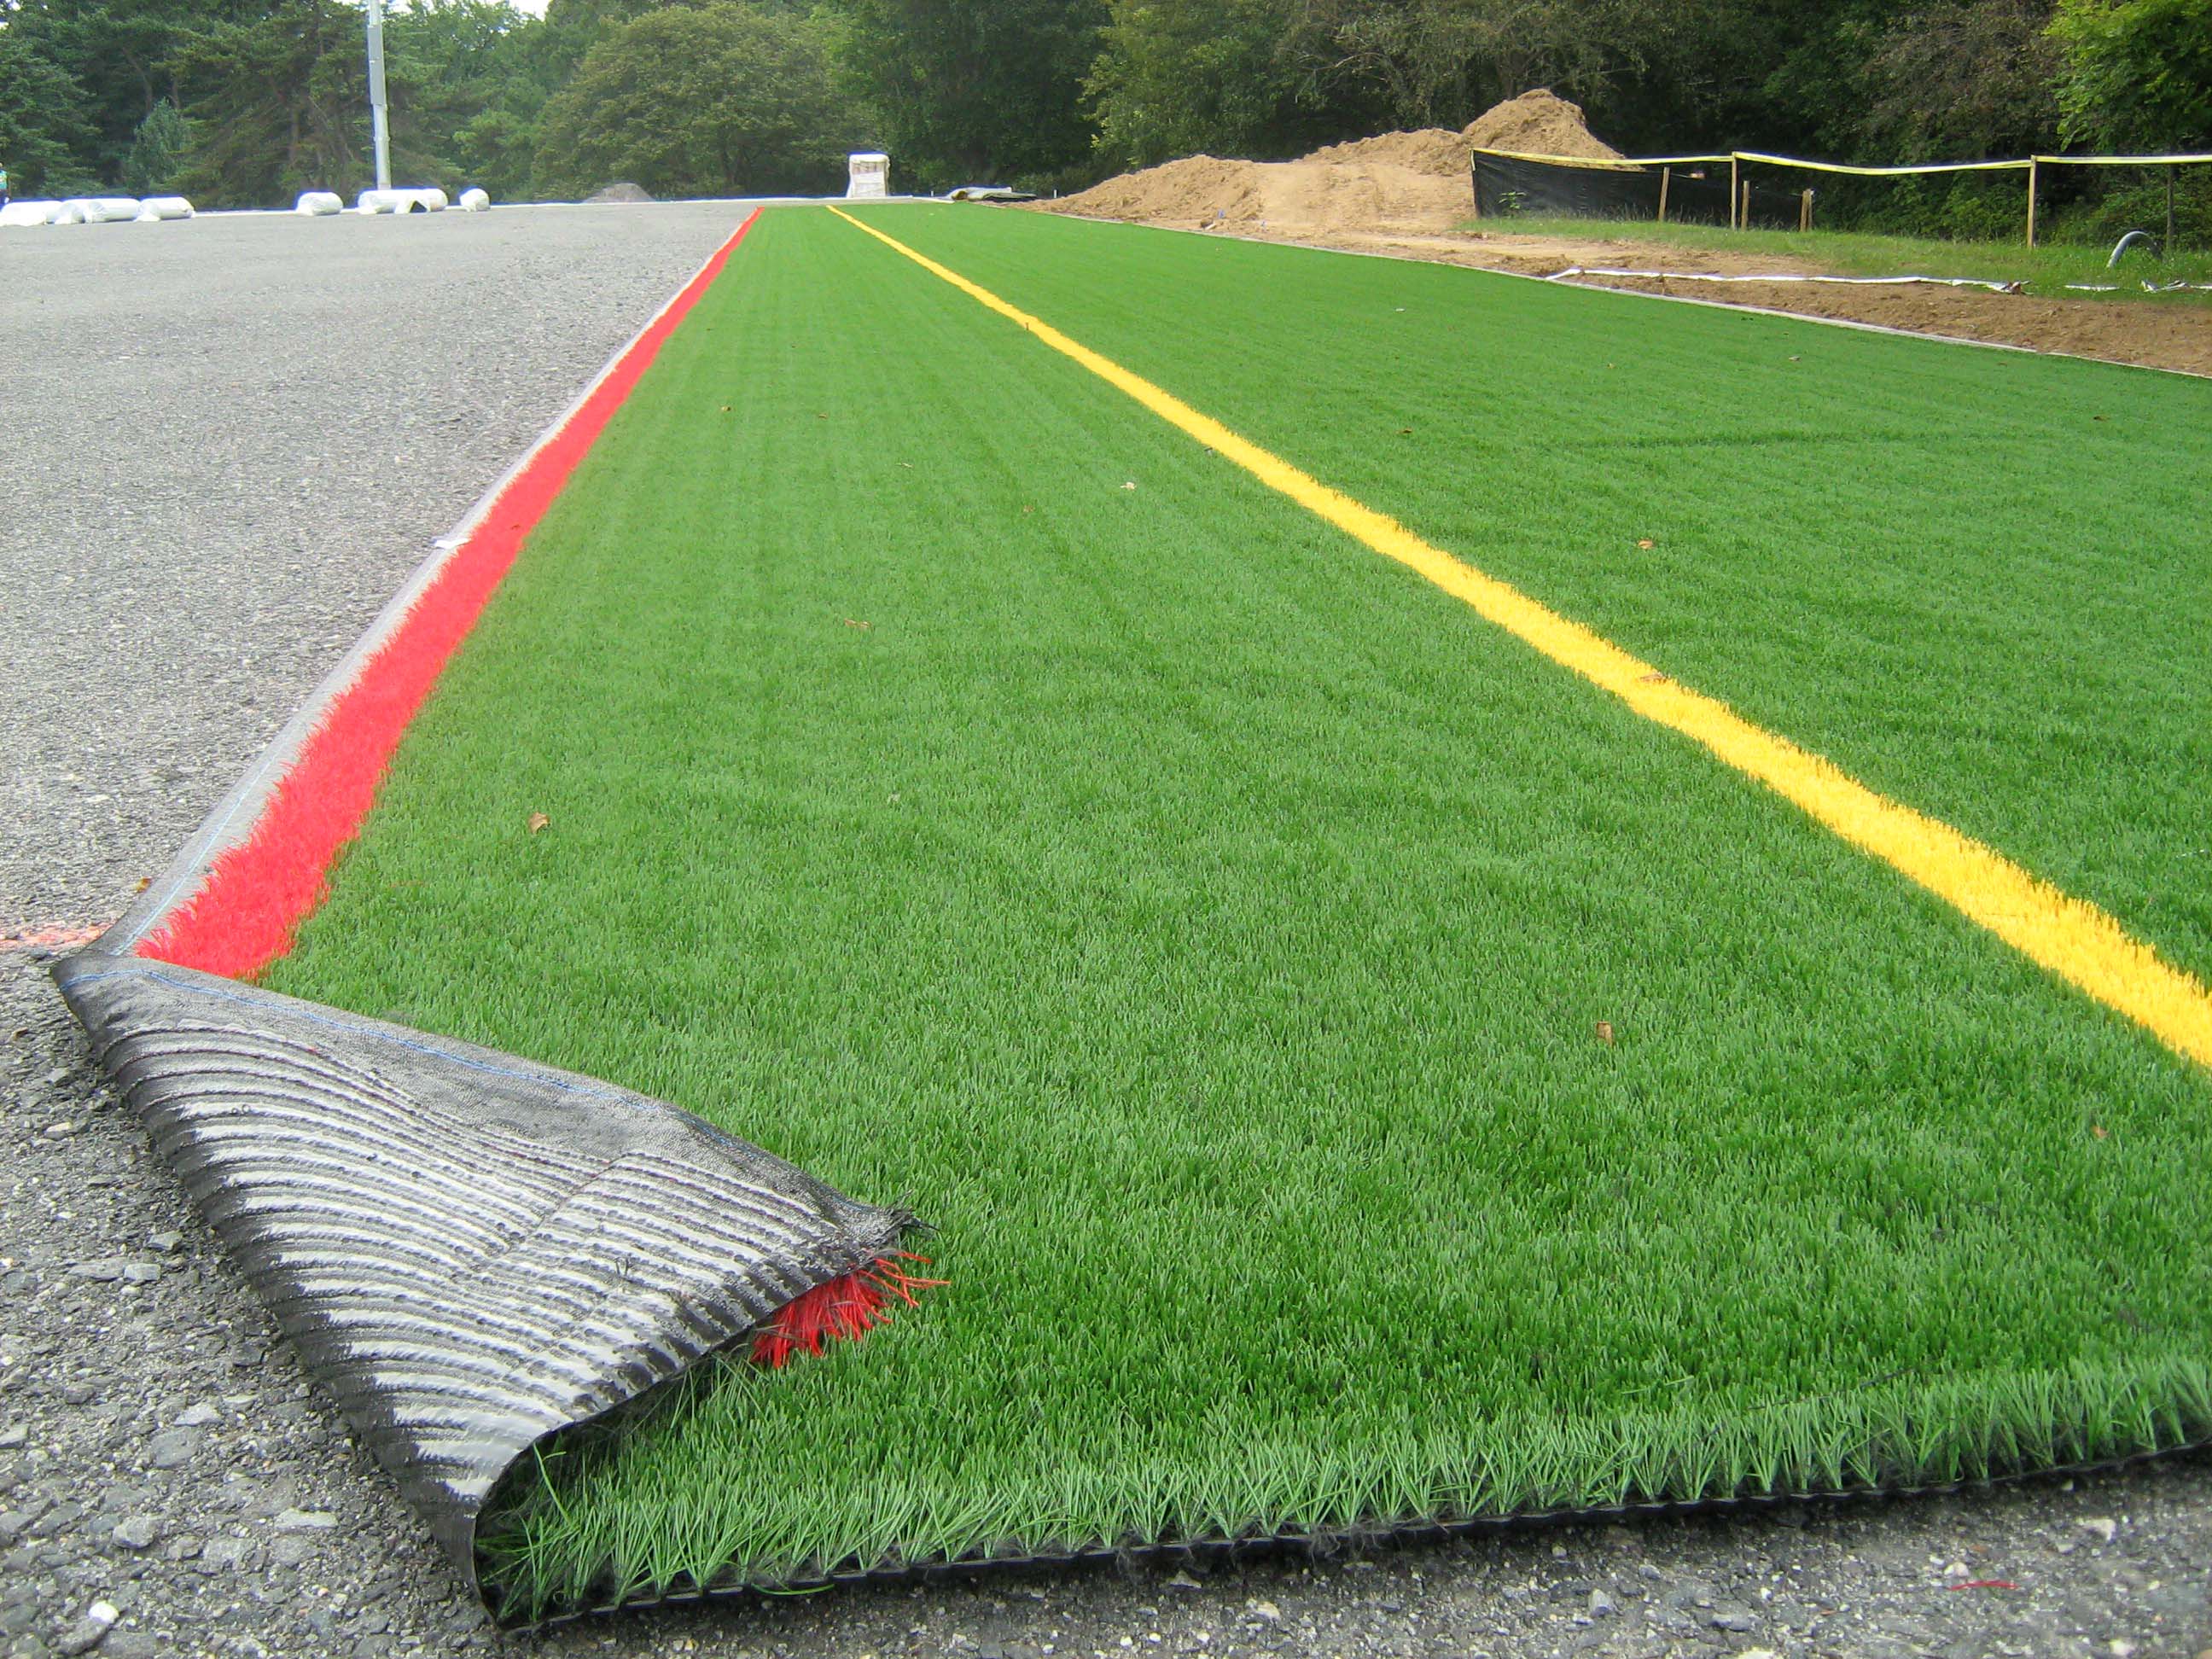 measure-seeks-to-install-turf-fields-and-fix-gym-roof-the-bottom-line